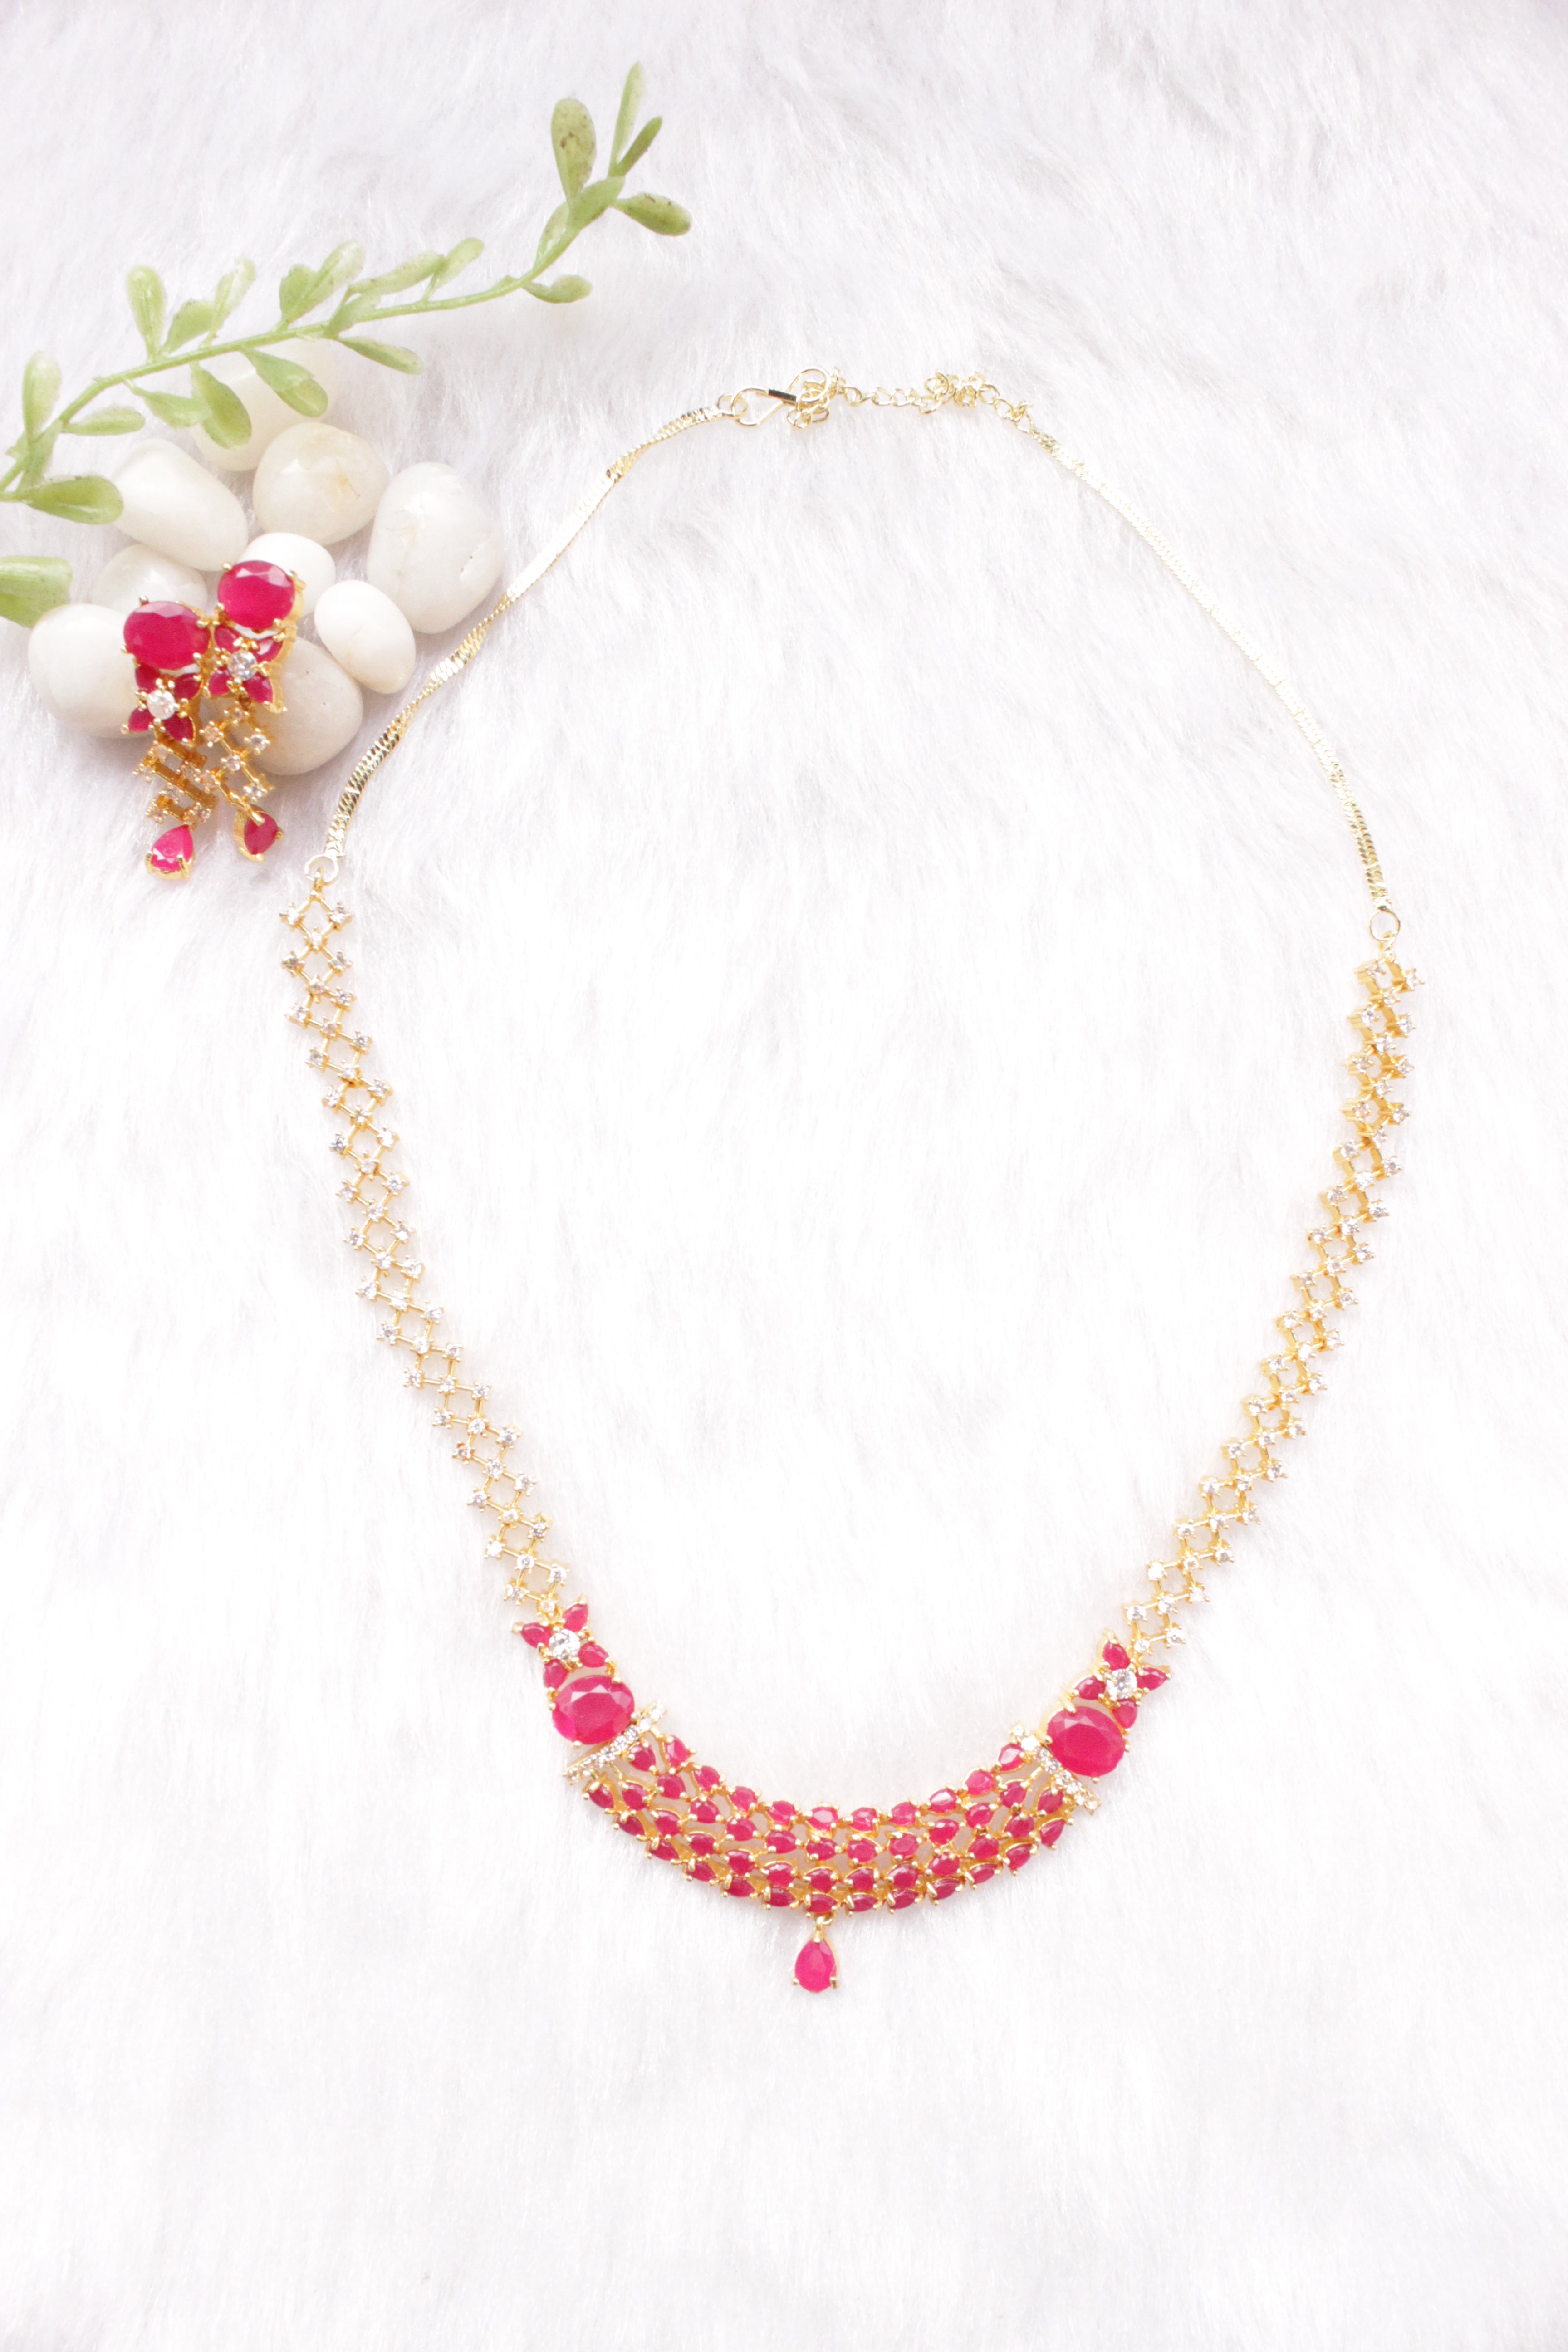 Red Ruby Stones and American Diamond Studded Delicate Gold Finish Necklace Set with Dangler Earrings